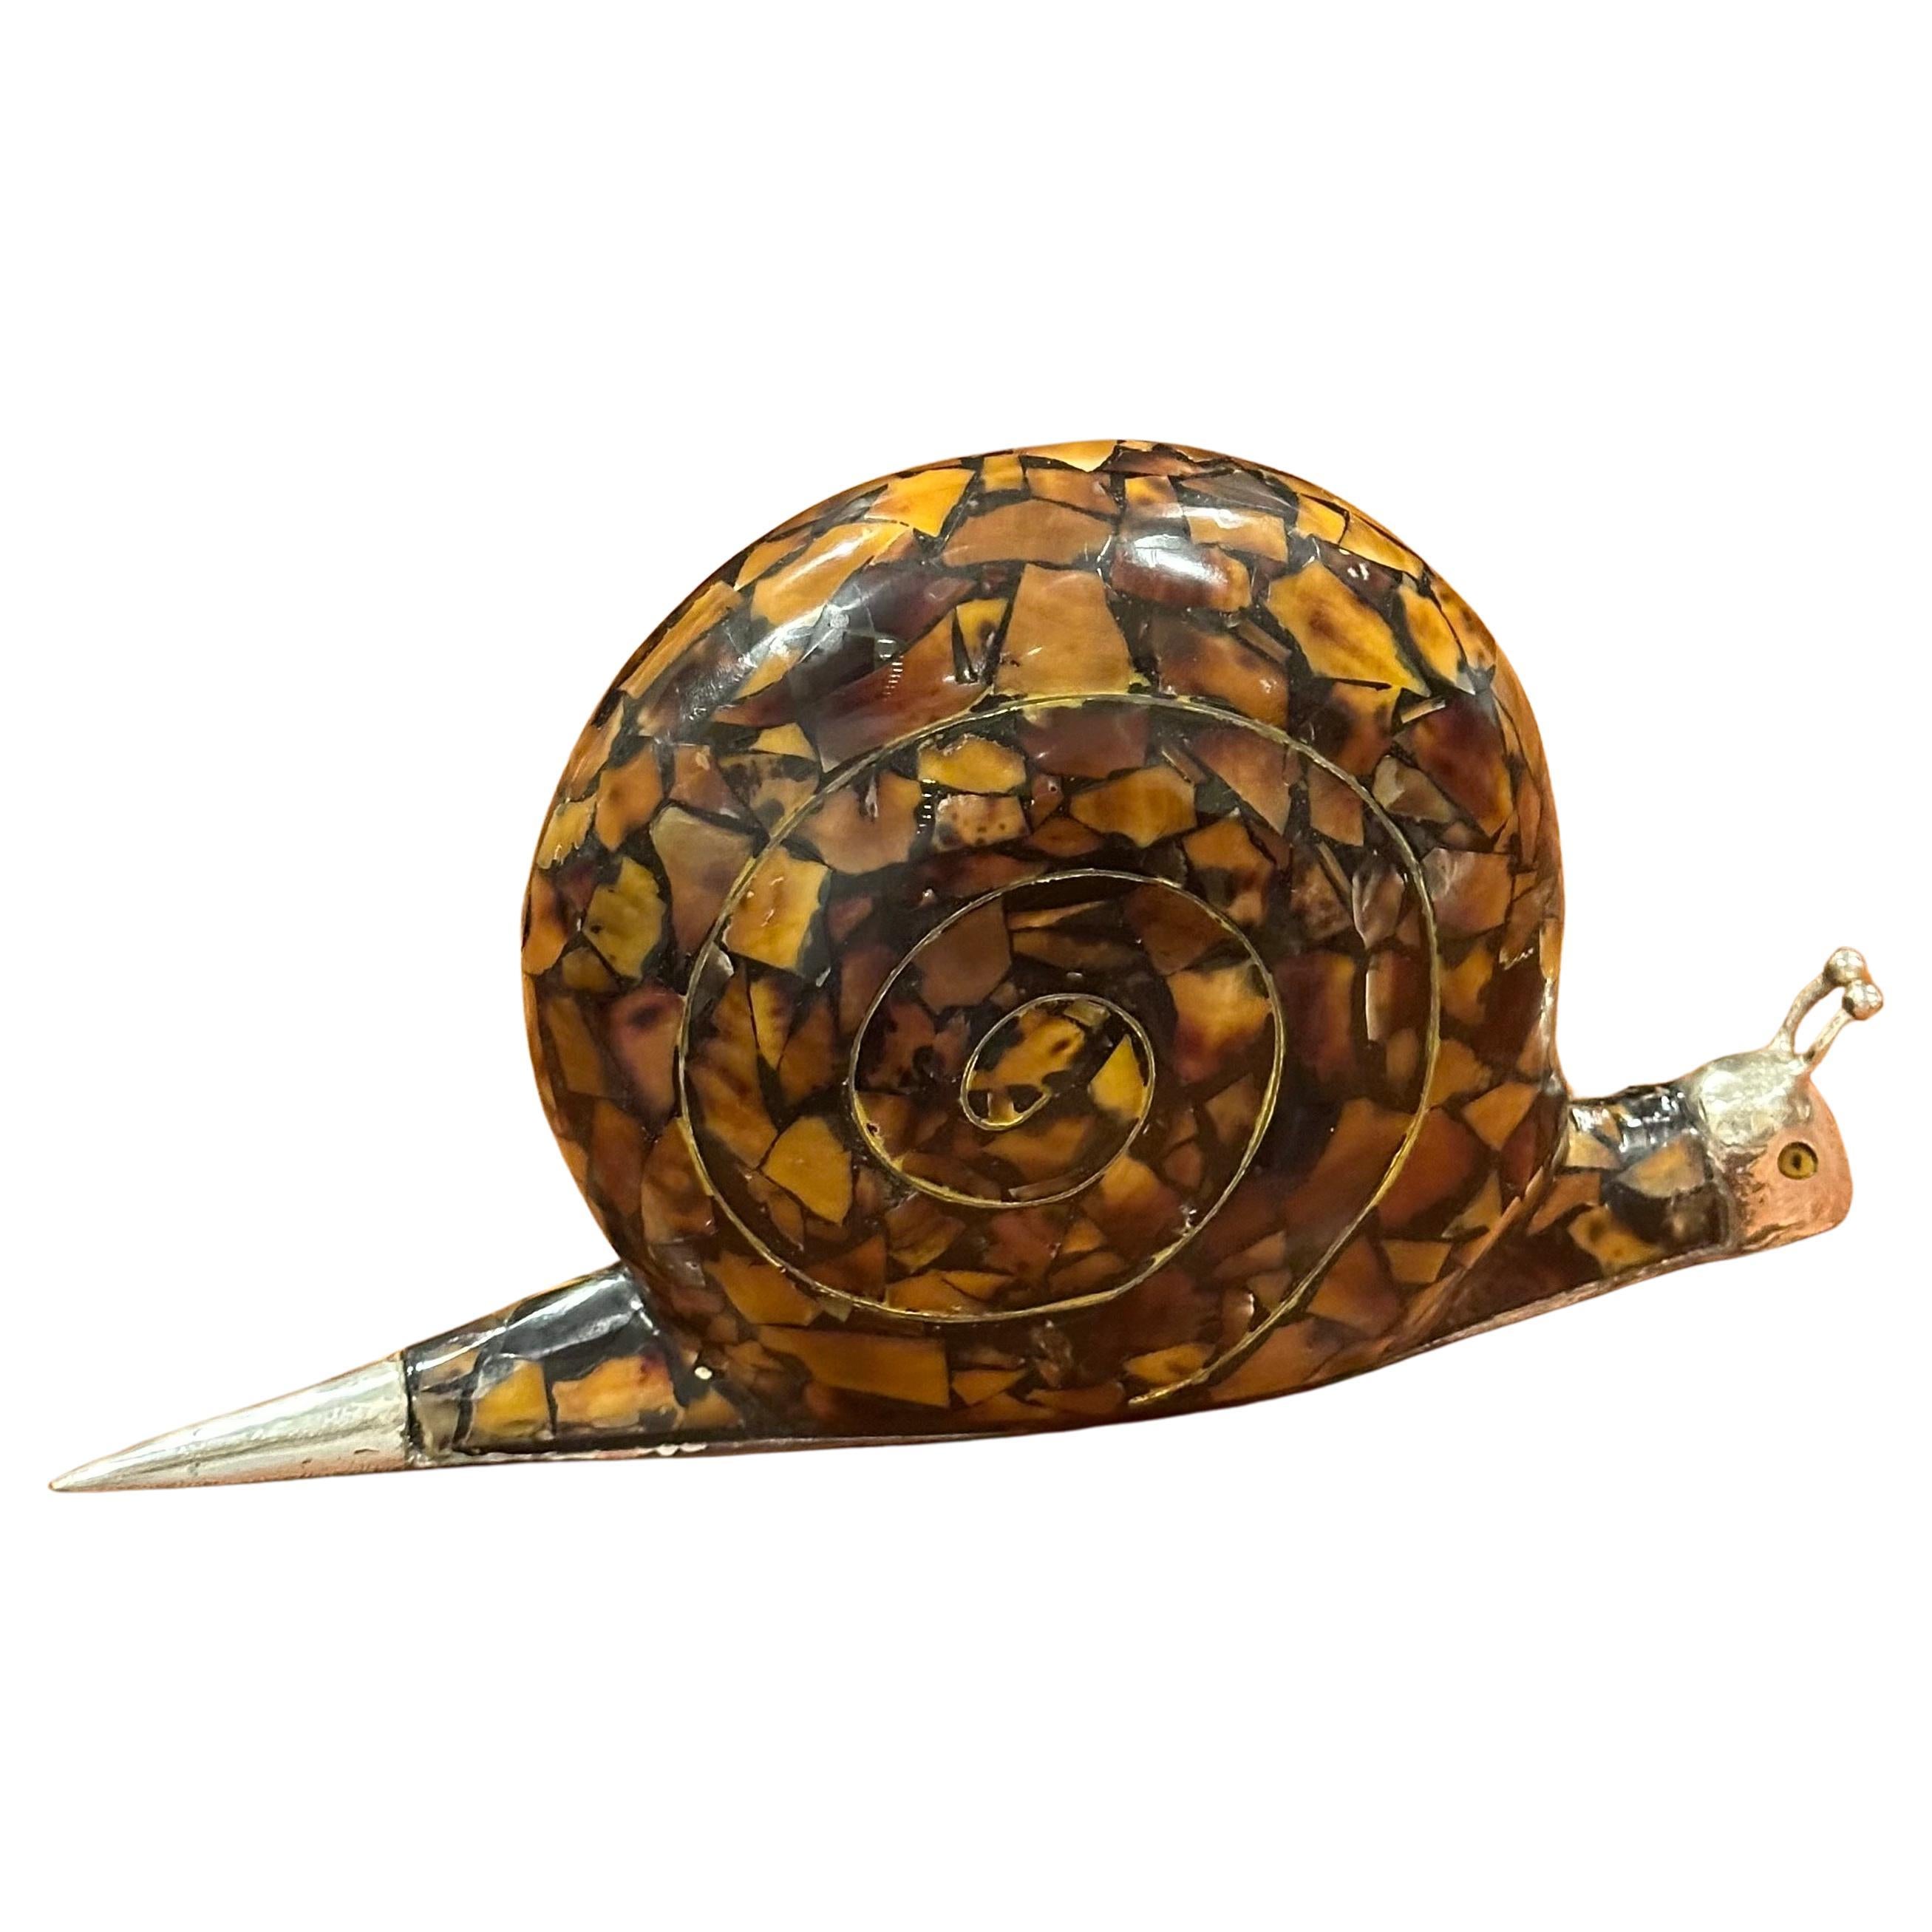 Large penshell and silver plate snail sculpture by Maitland Smith, circa 1970s. This hard to find piece is in very good vintage condition and measures 9.75